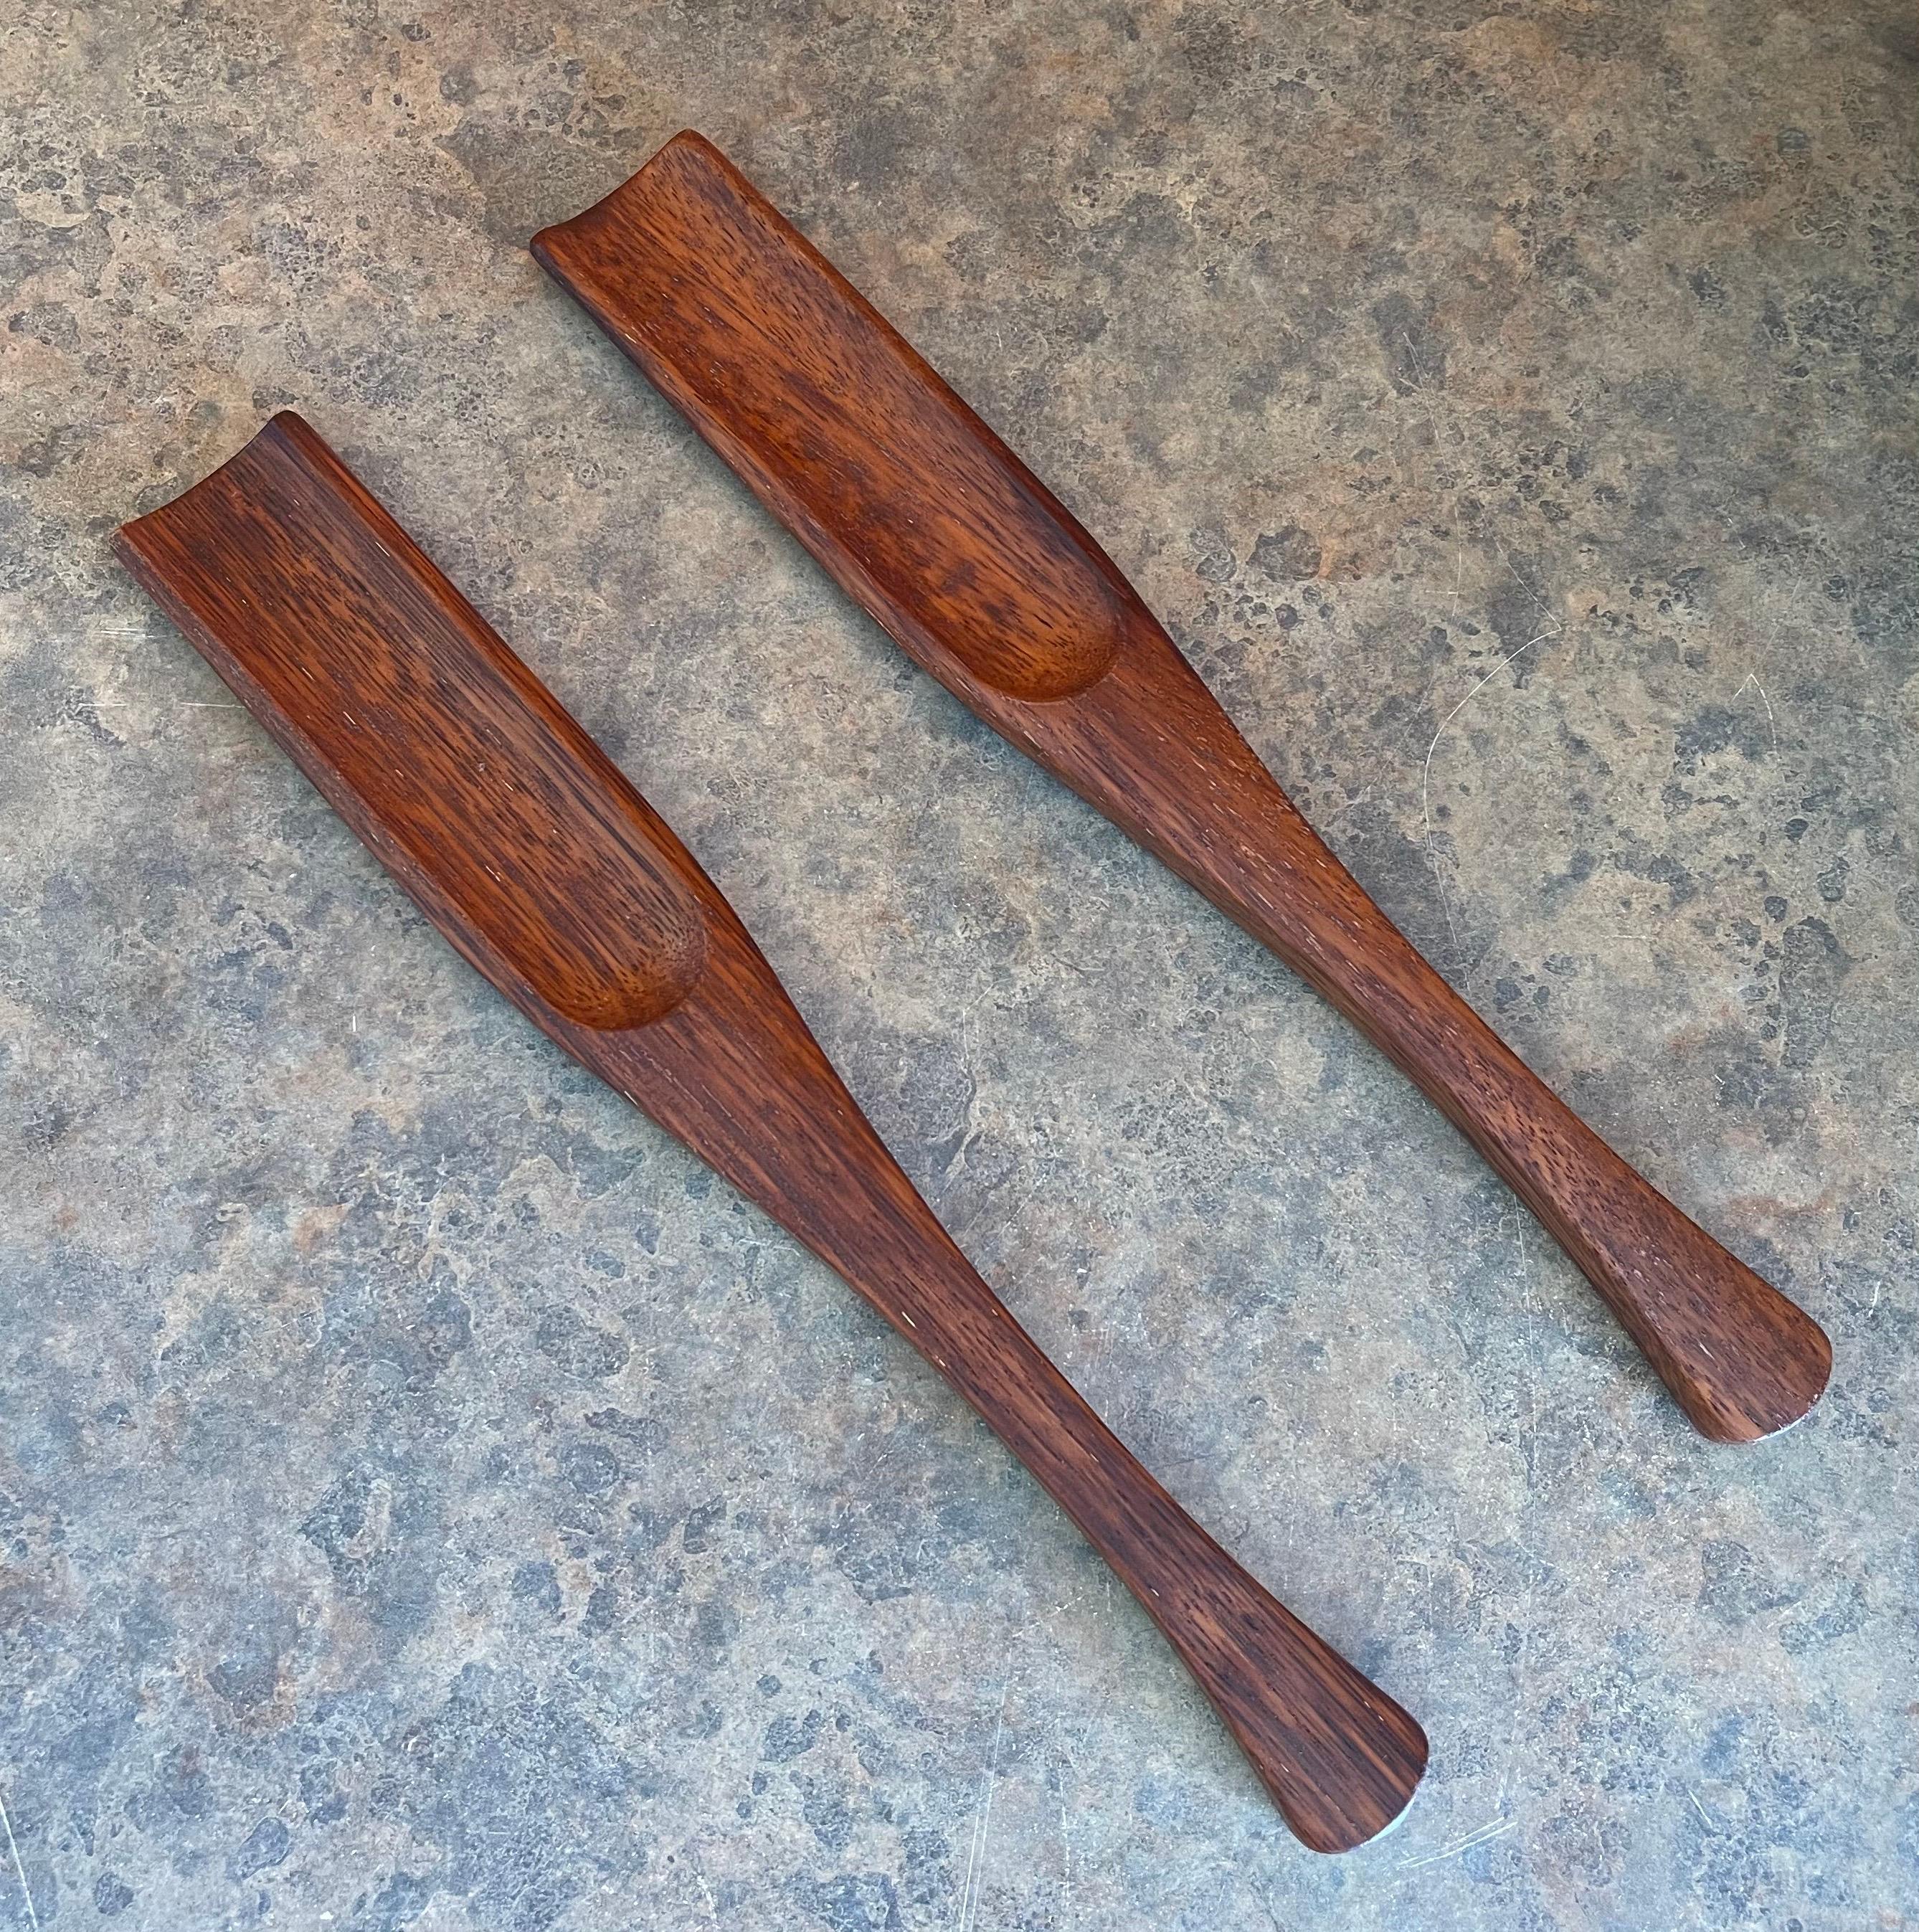 A nice pair of MCM teak salad servers by Jens Quistgaard for Dansk, circa 1970s. The servers are made of solid teak and they measure 13.25